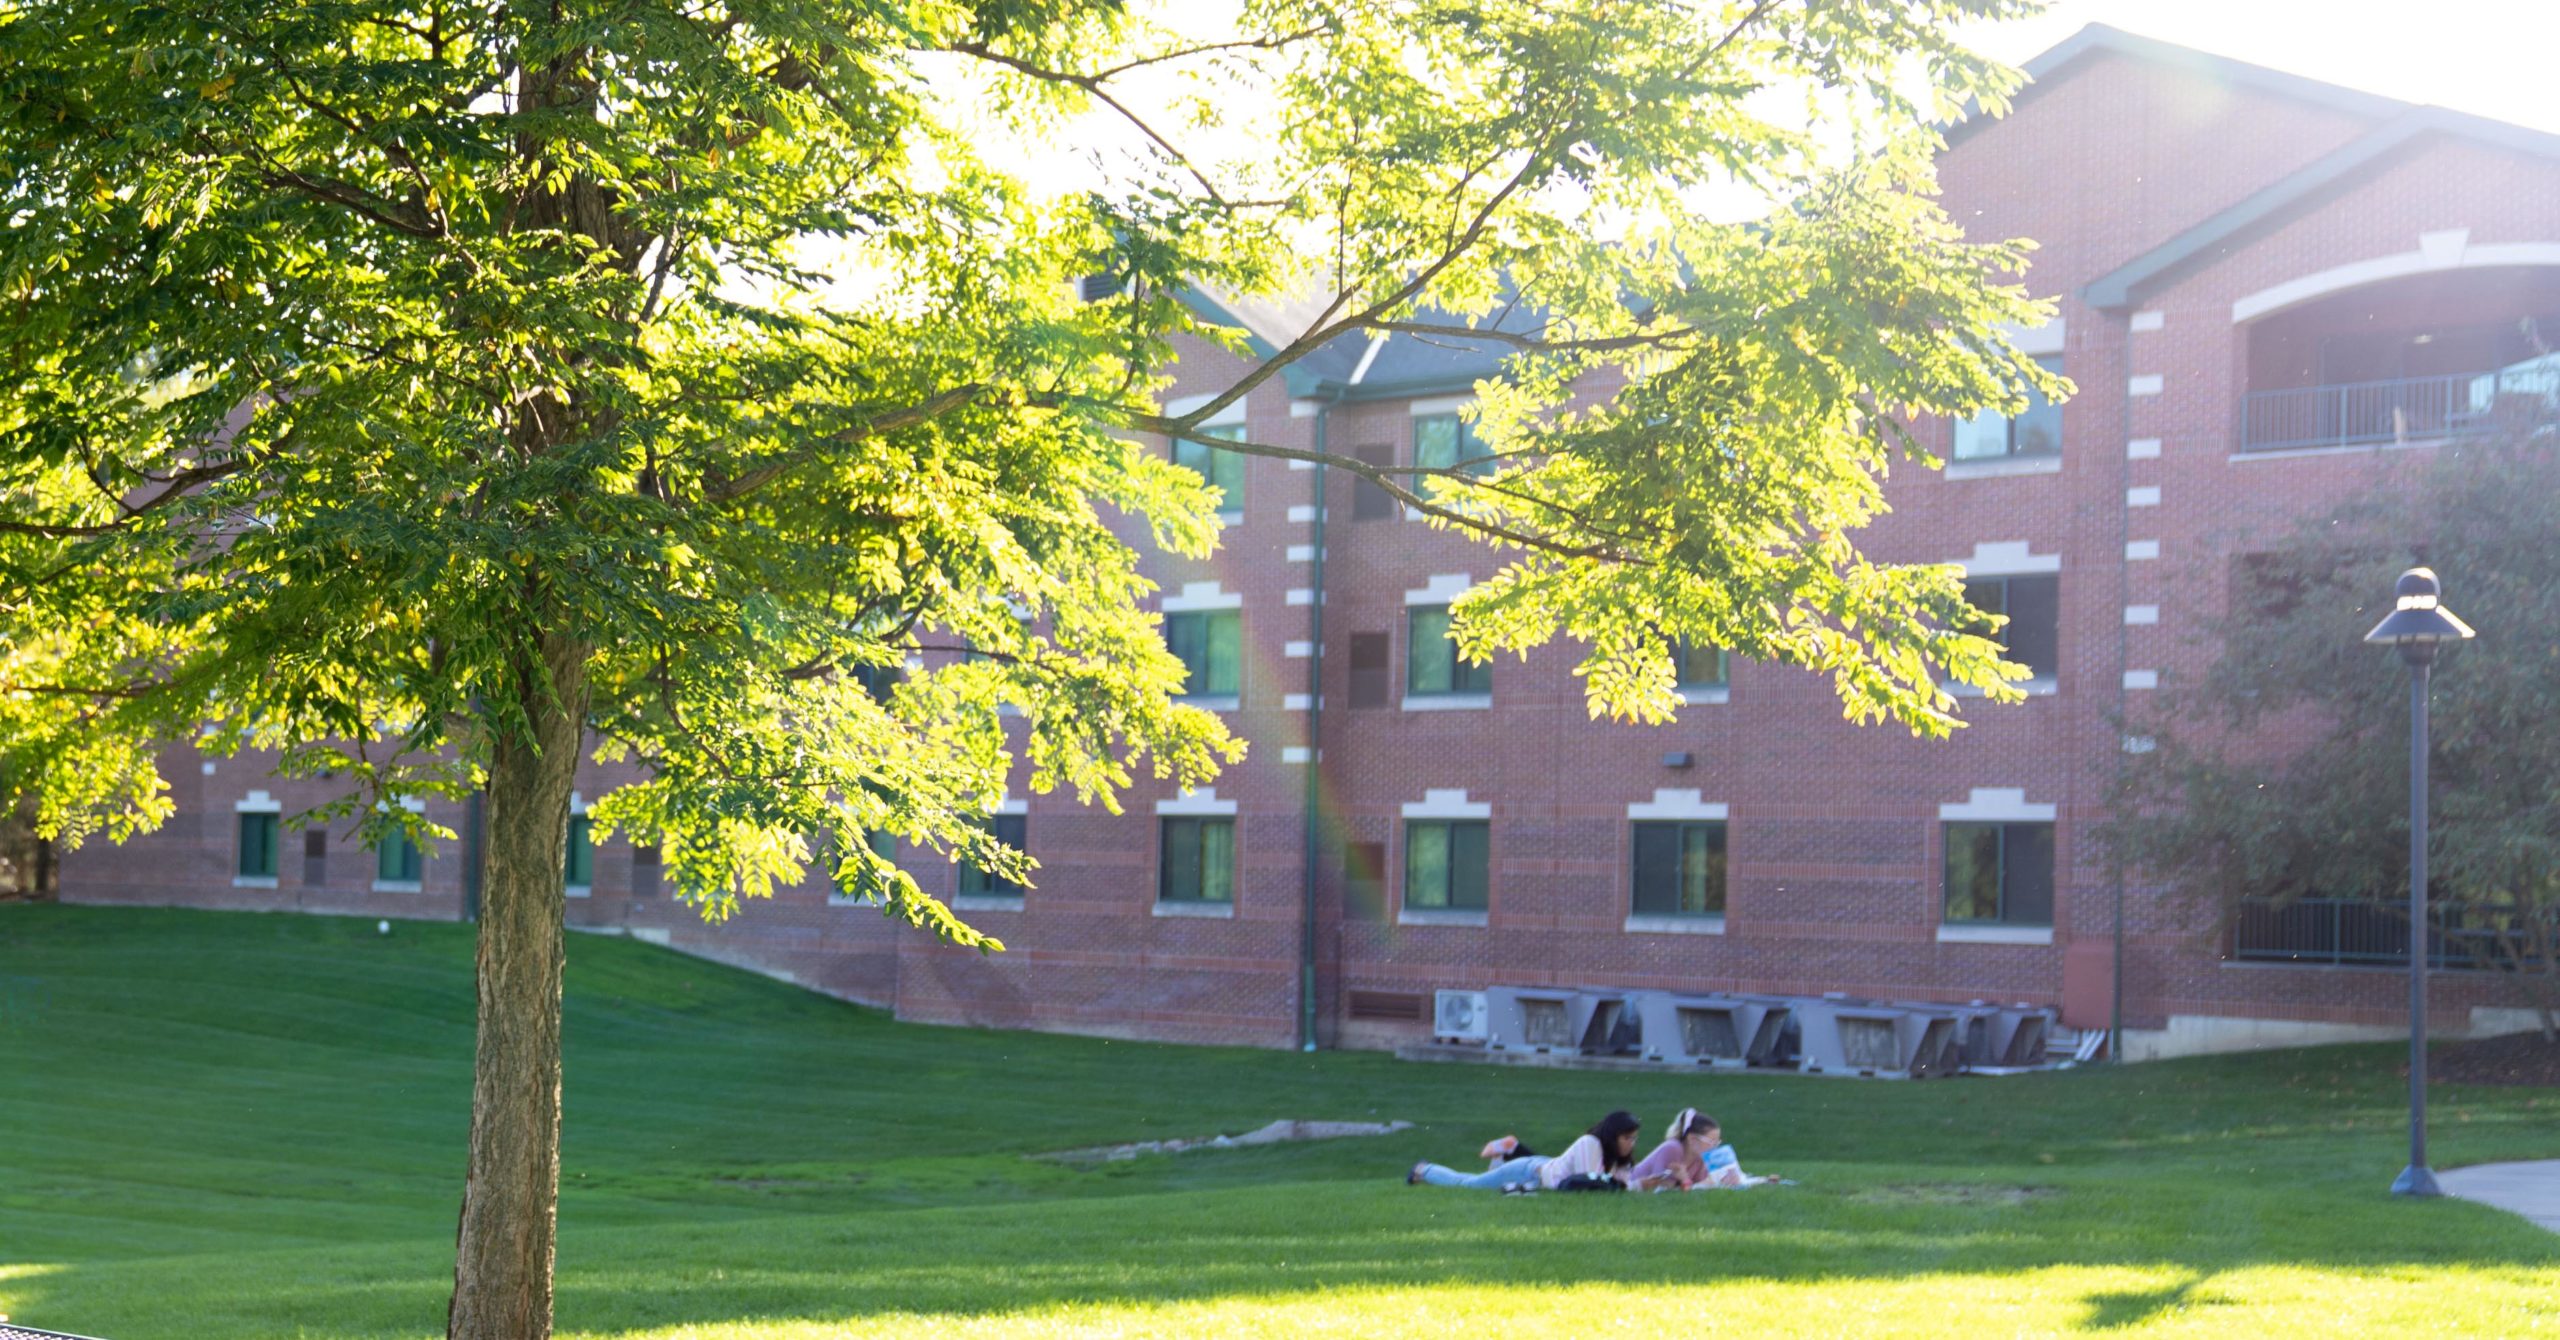 Students enjoying the warm weather in spring on campus